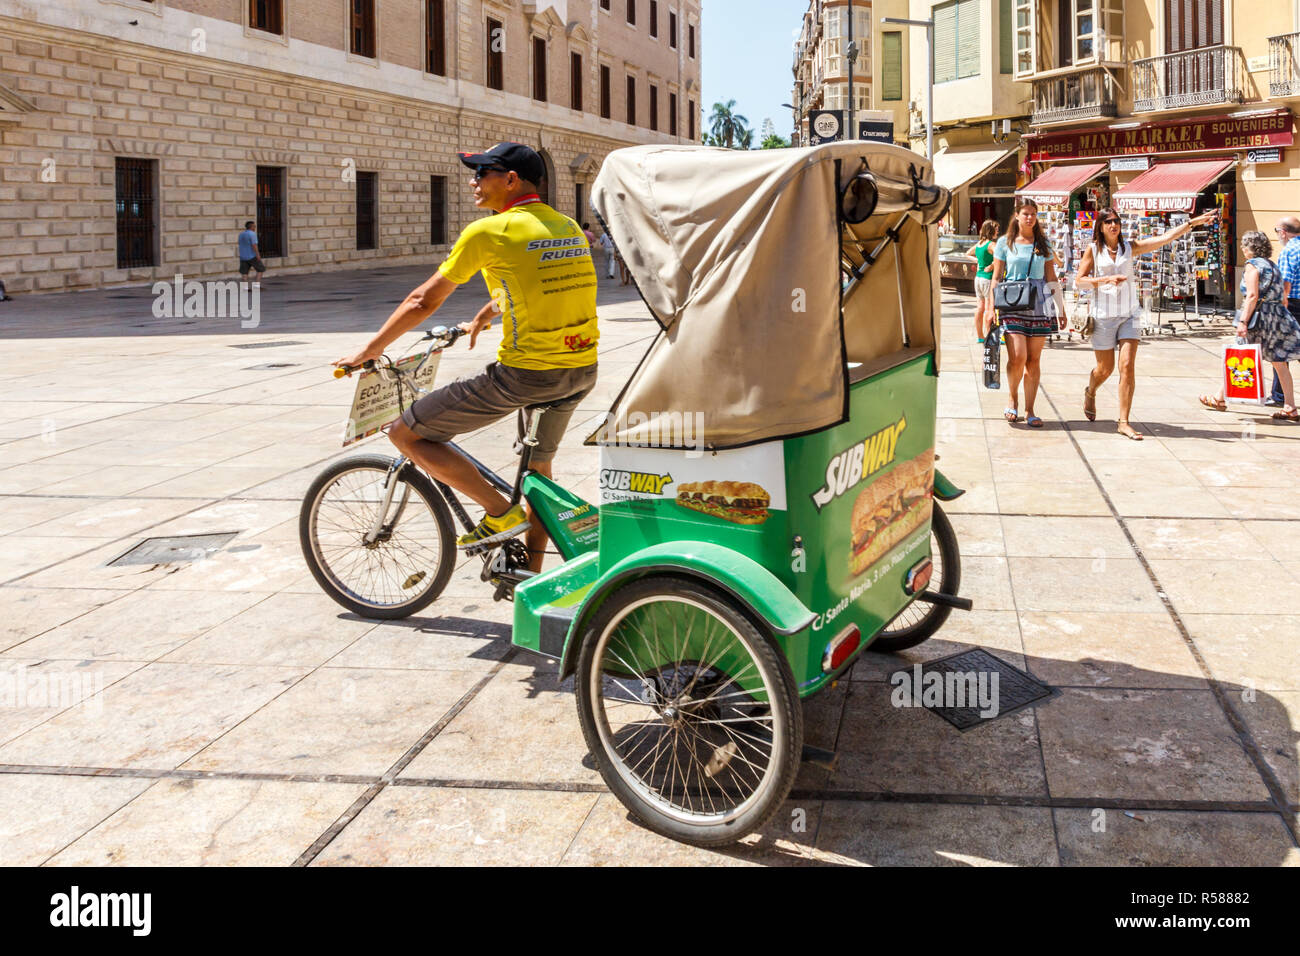 Malaga, Spain - 26th August 2015: A tricycle taxi looking for business. They take tourists on sightseeing trips around the city. Stock Photo